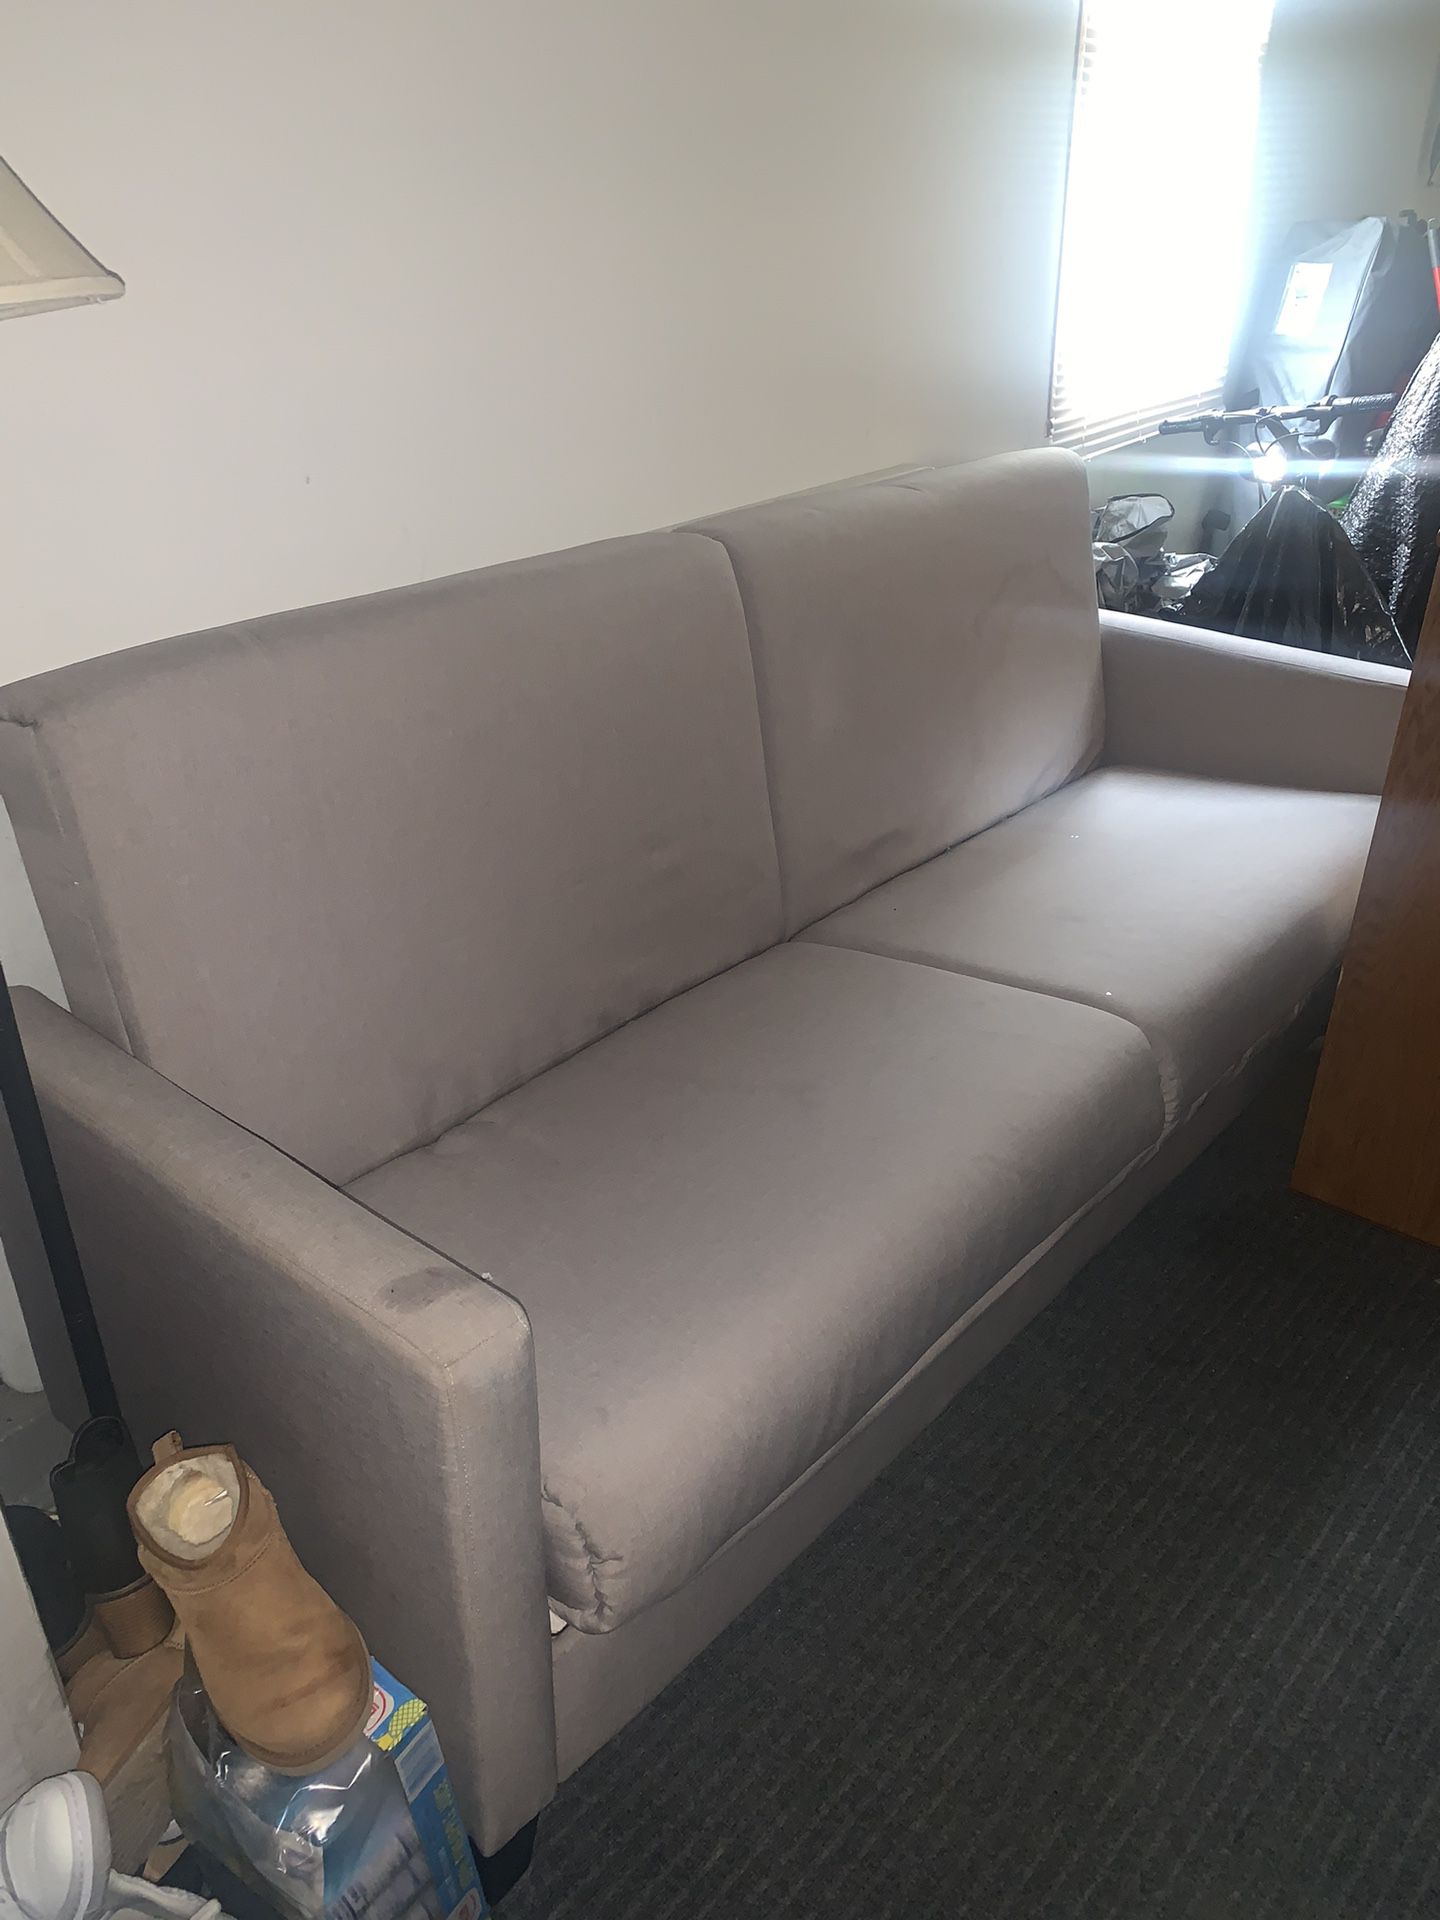 FUTON COUCH BED VERY COMFY & FREE LAMP